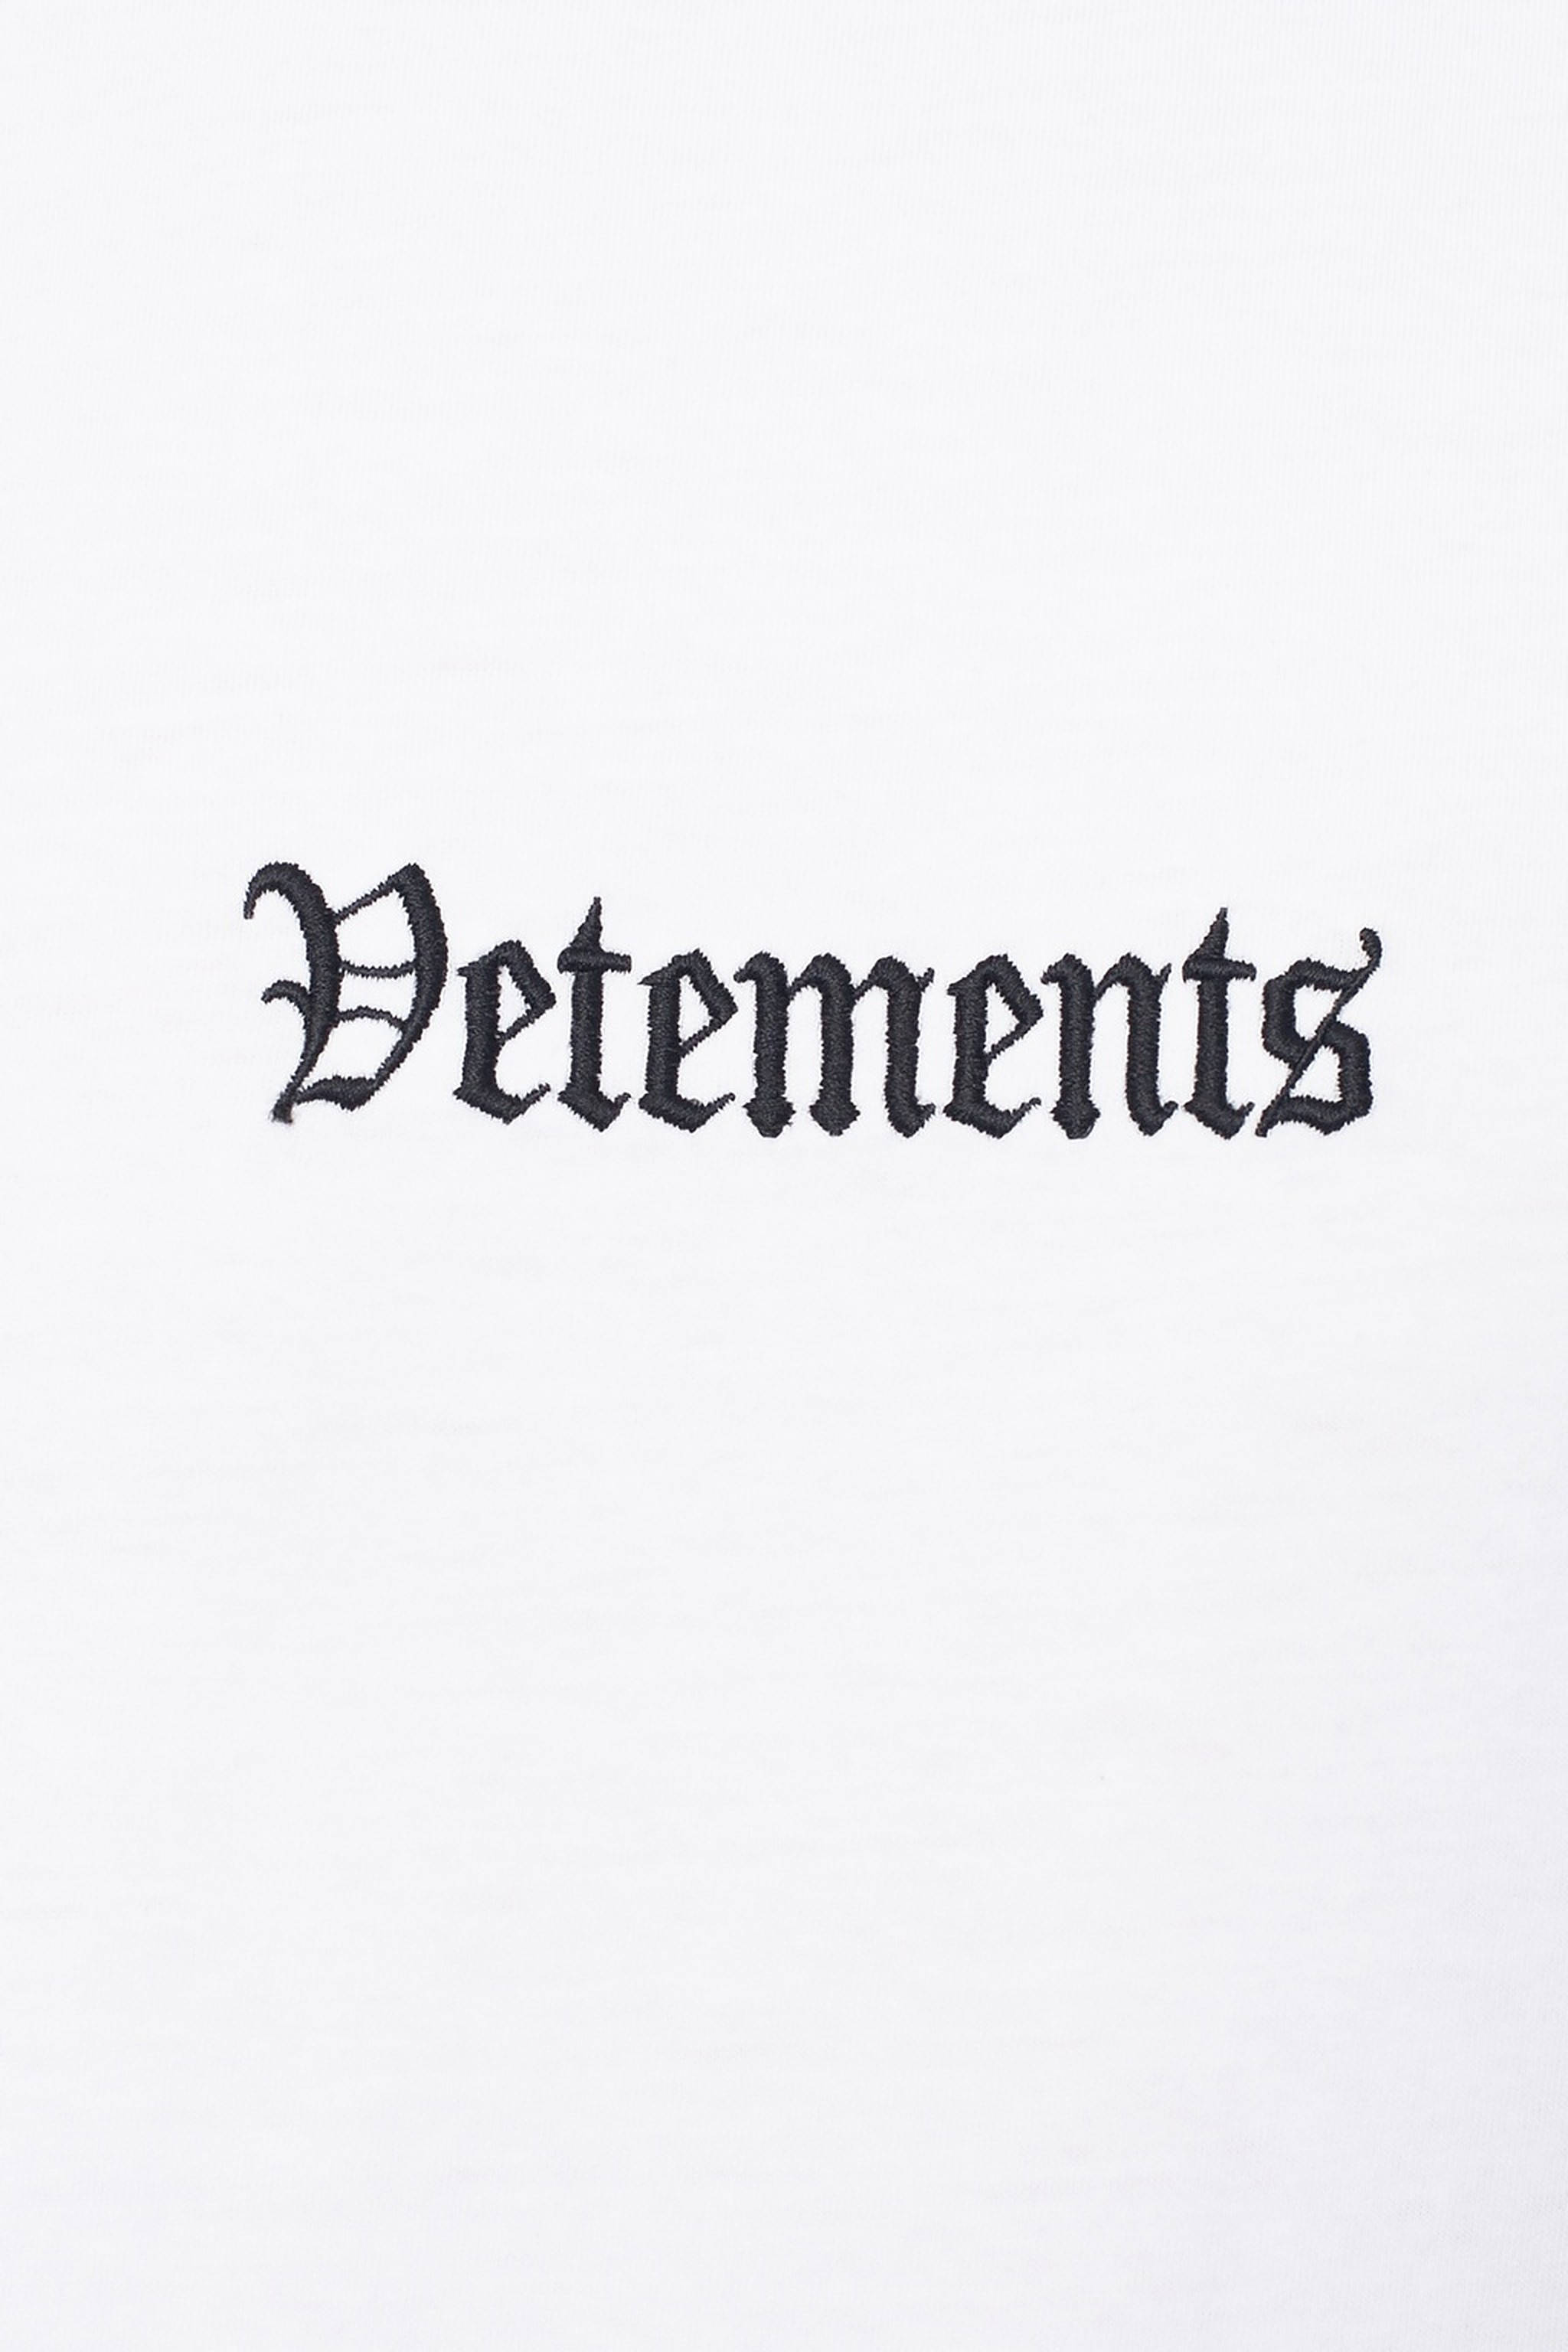 Download Vetements Embroidered On White Wallpaper | Wallpapers.com